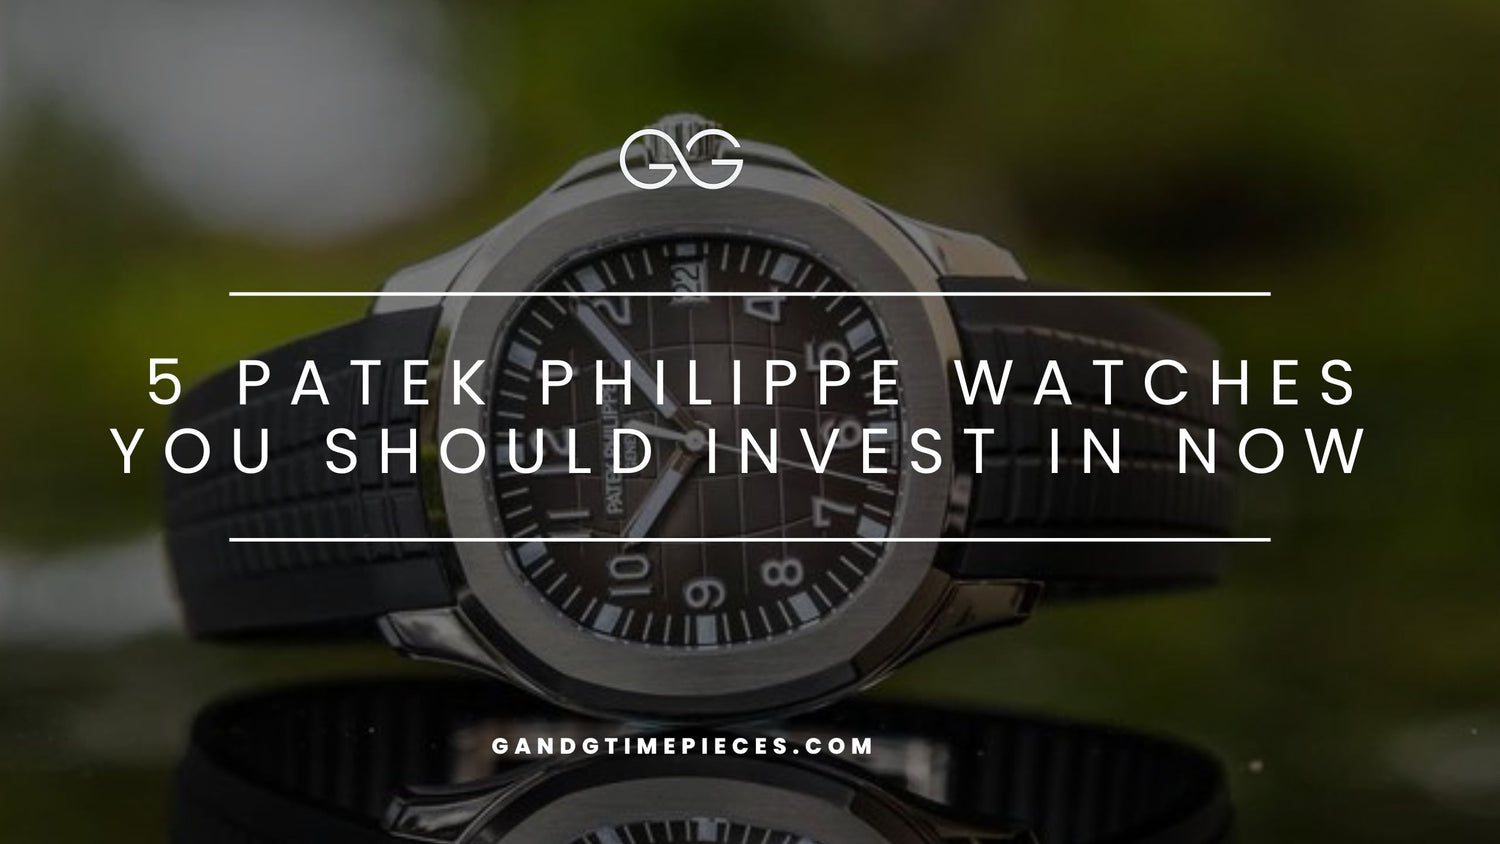 5 Patek Philippe Watches You Should Invest In Now